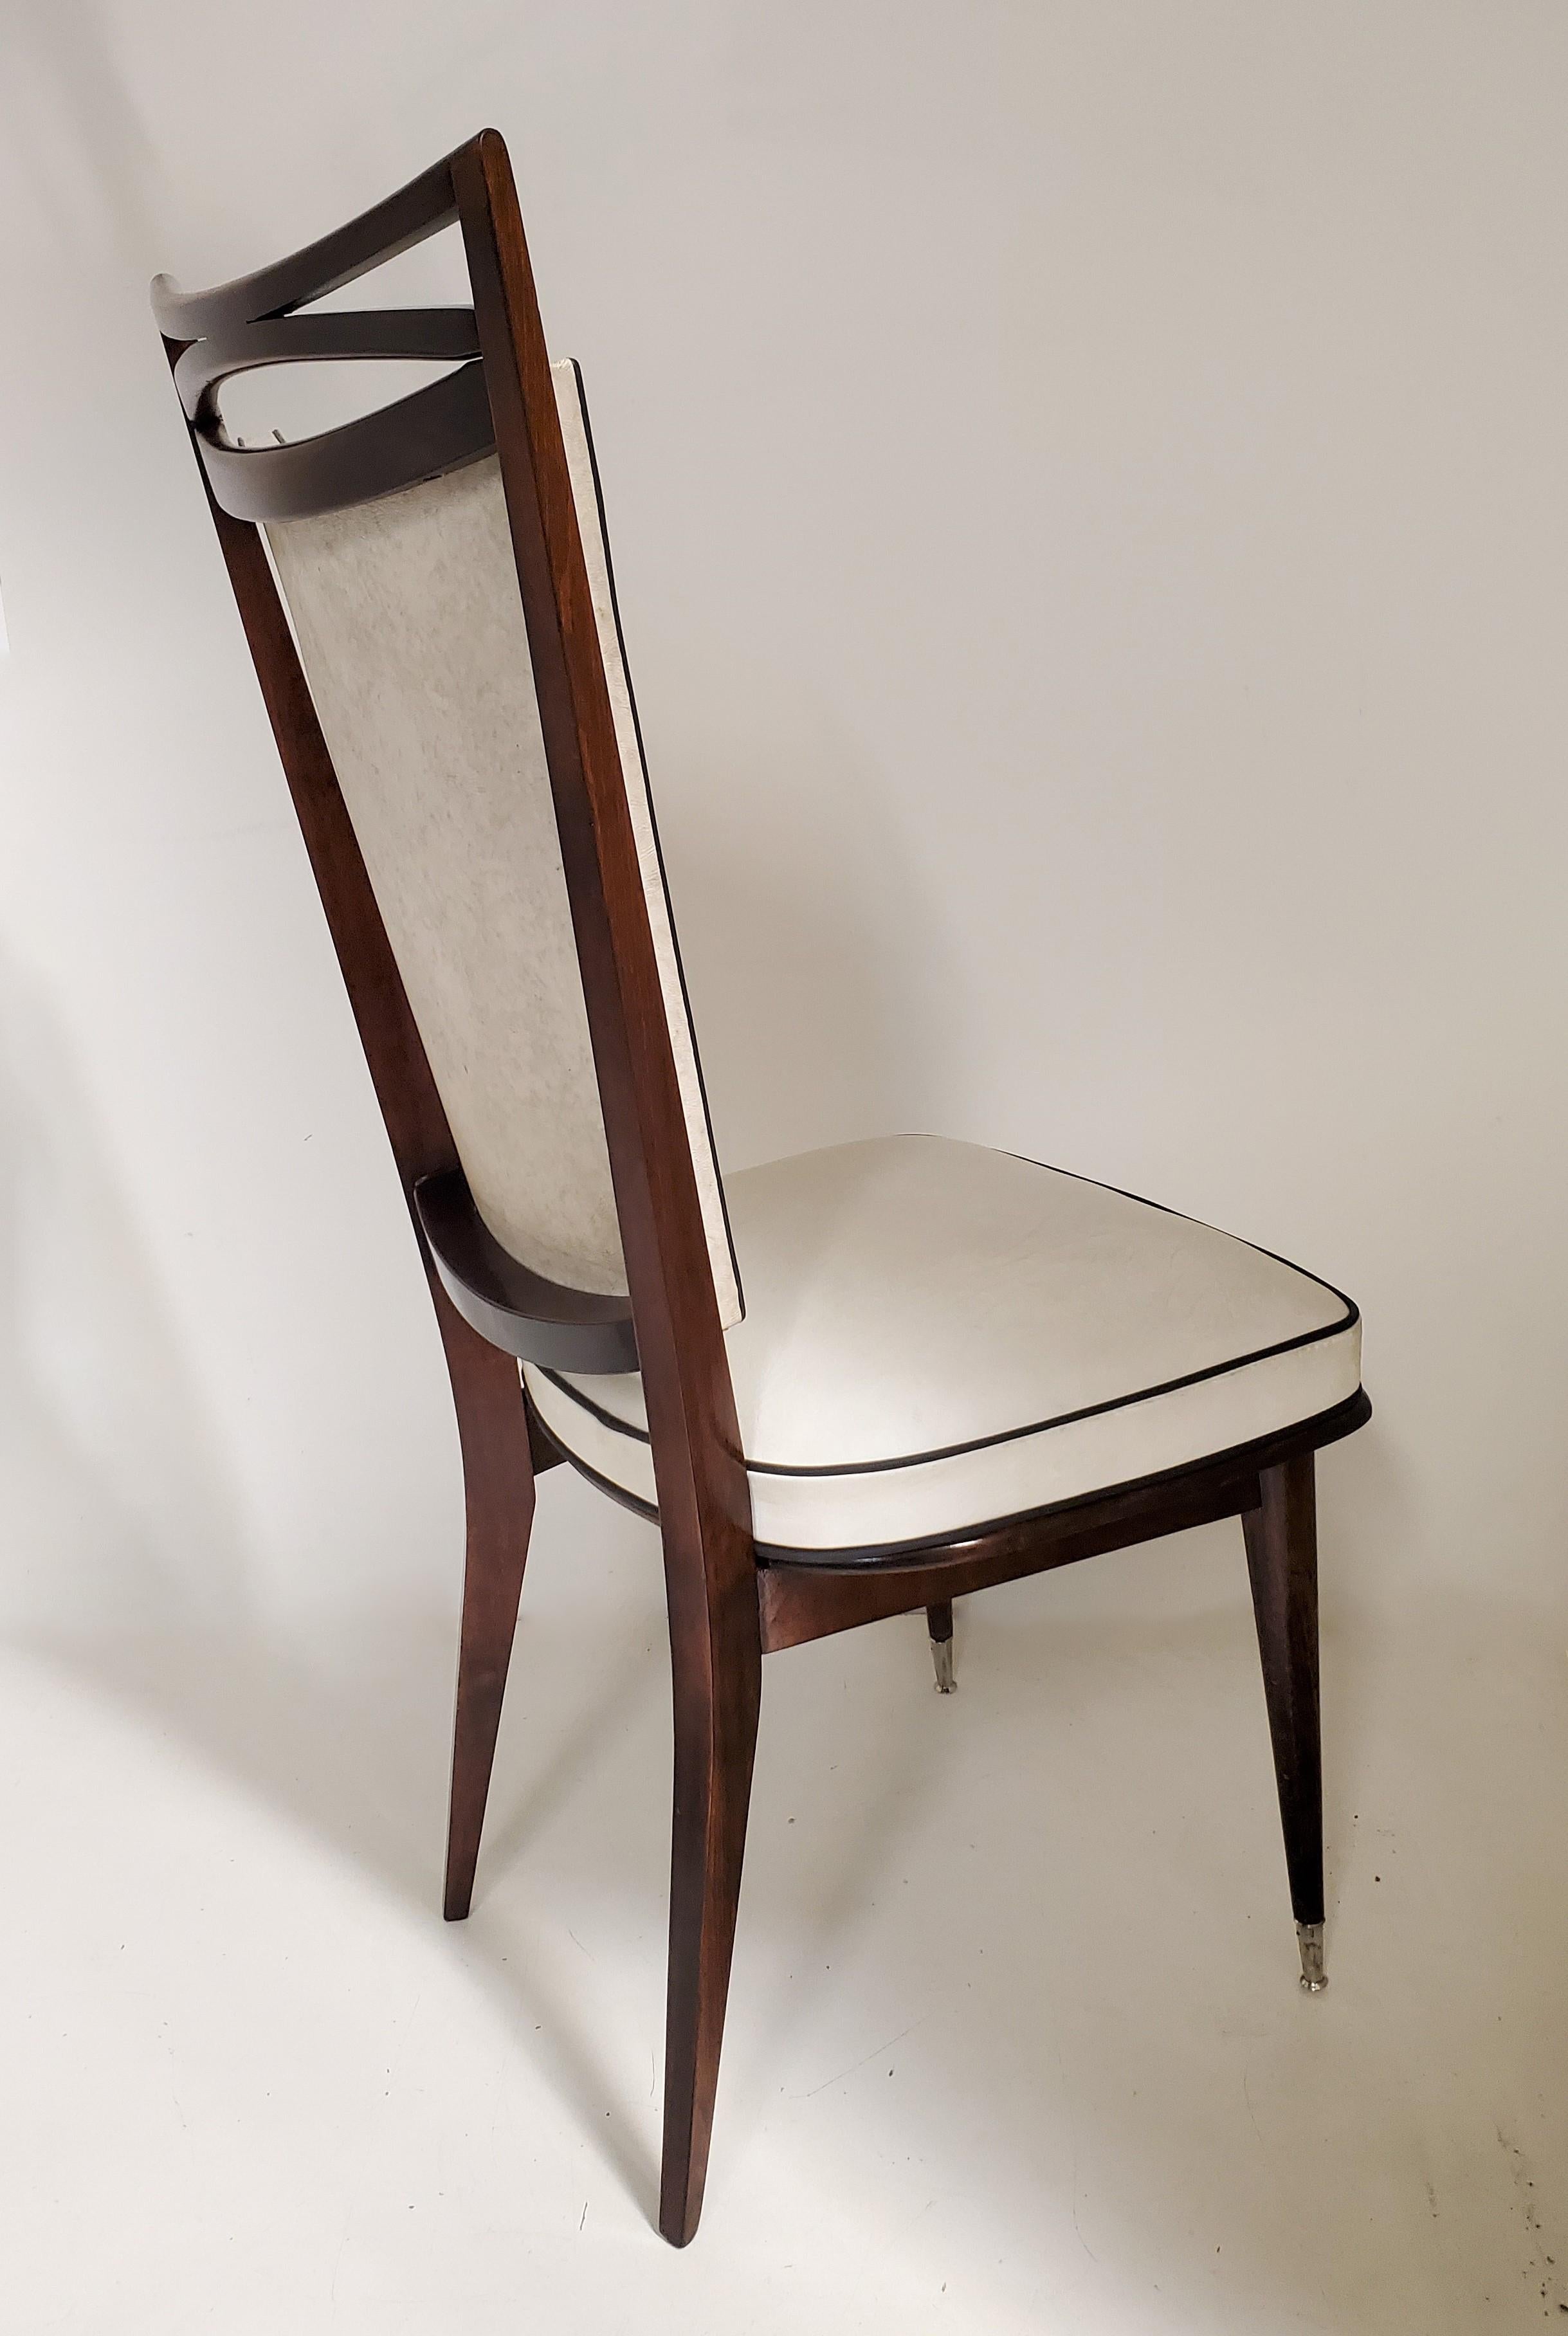 Pair of French Mid-Century Modern Dining / Side Chairs -Deep Mahogany Finish For Sale 6